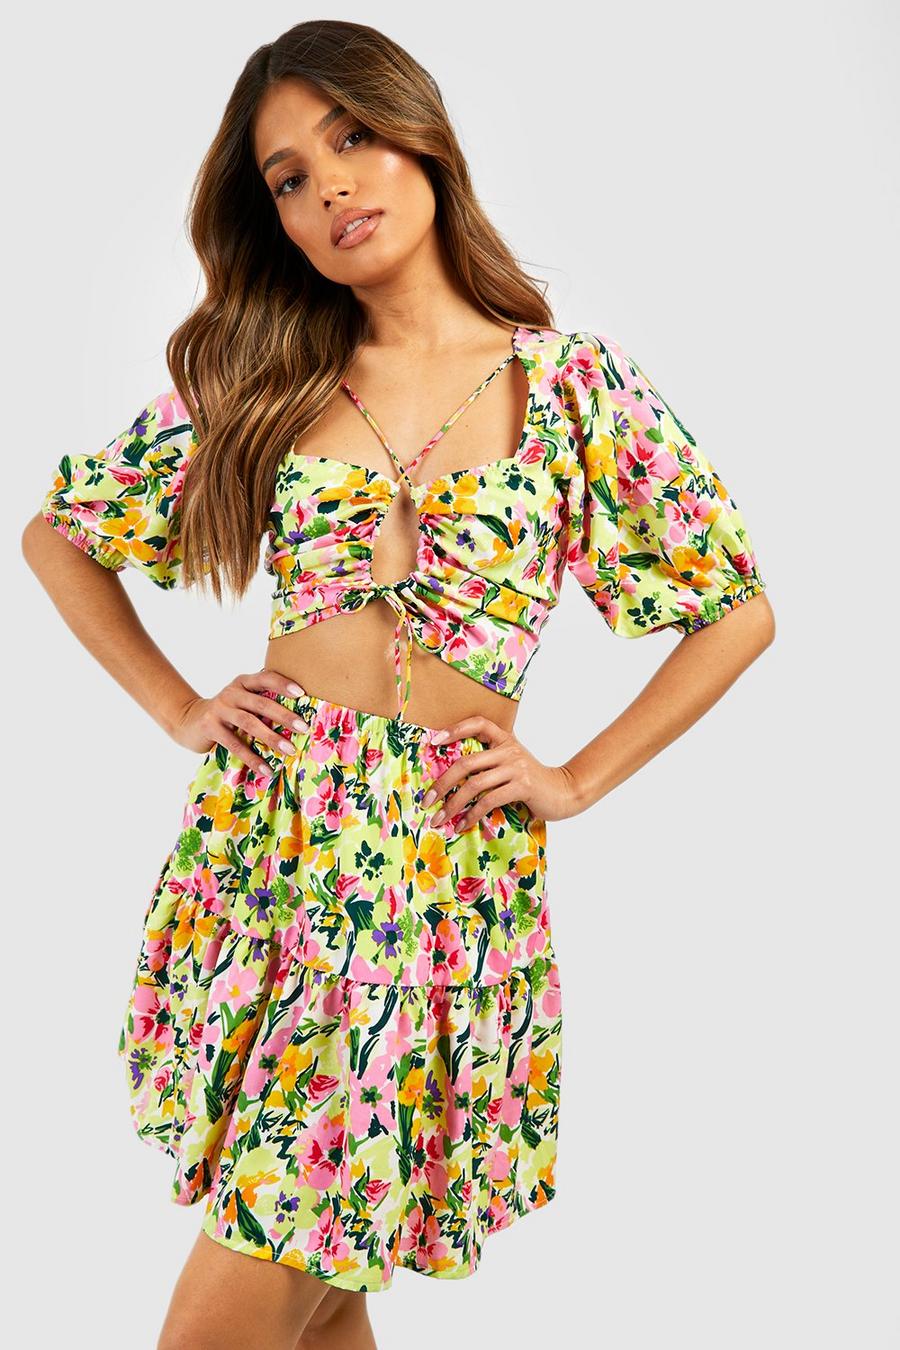 Chartreuse yellow Floral Strappy Sweetheart Bralette & Mini Skirt